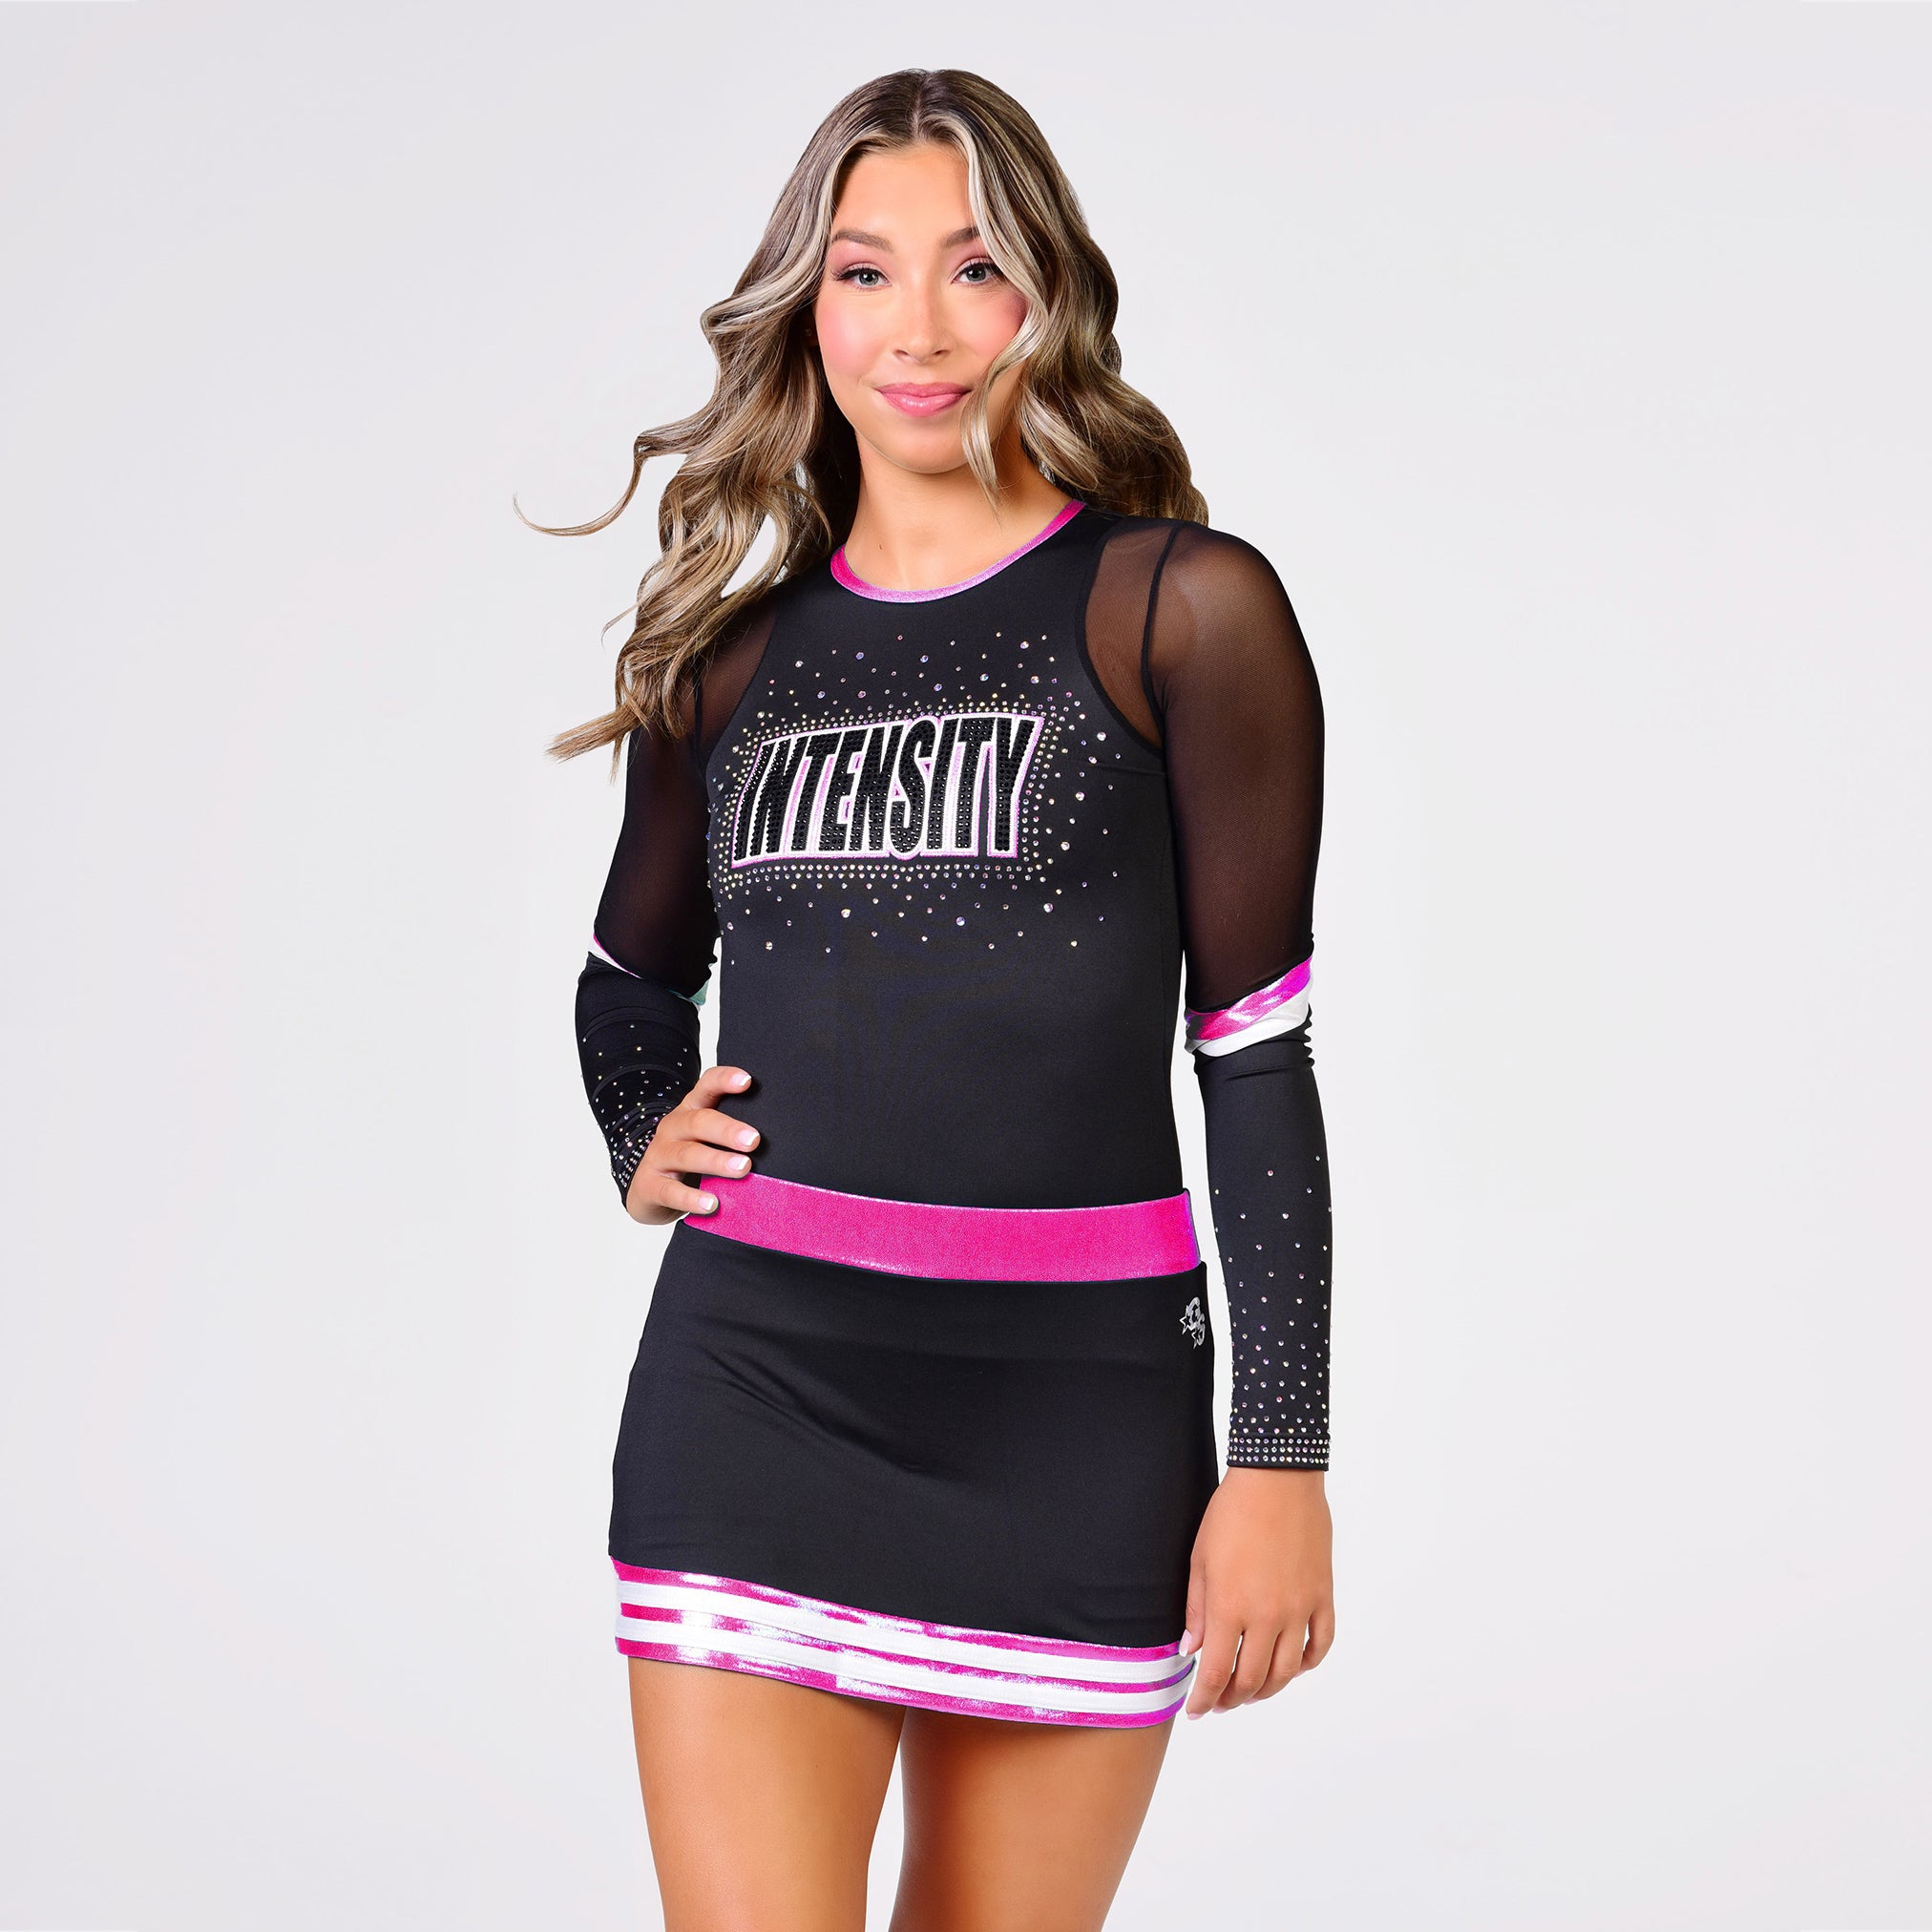 Journey Uniform with Closed Back - Pink